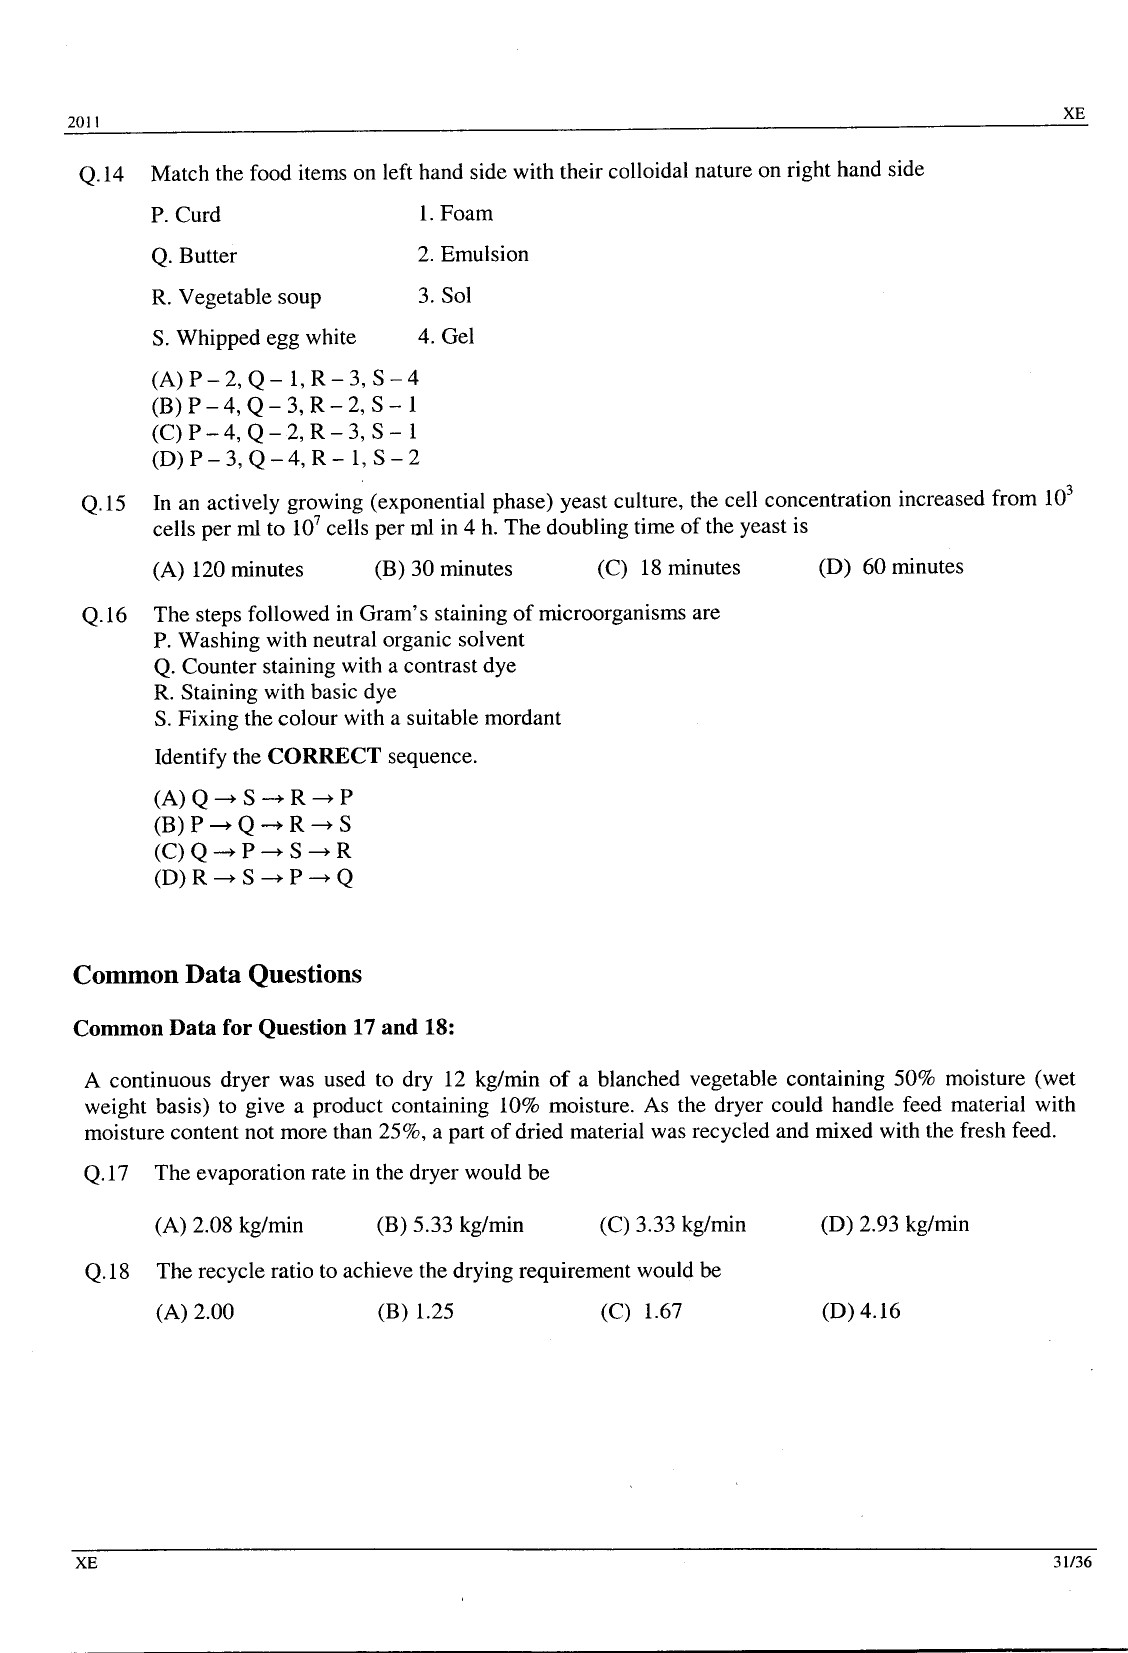 GATE Exam Question Paper 2011 Engineering Sciences 31